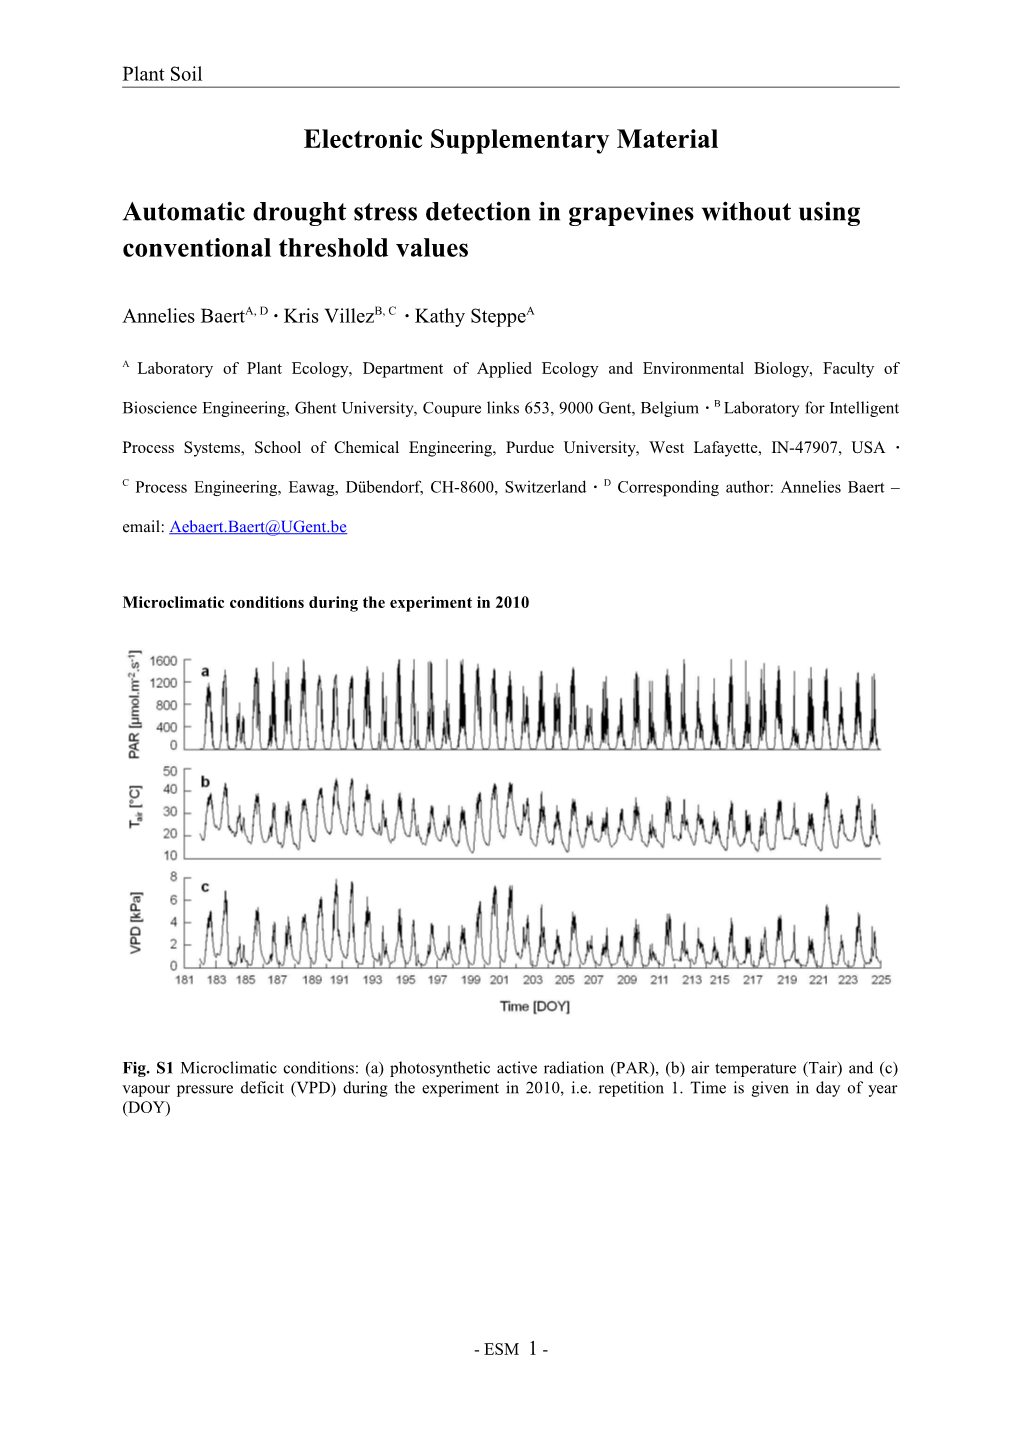 Automatic Drought Stress Detection in Grapevines Without Using Conventional Threshold Values